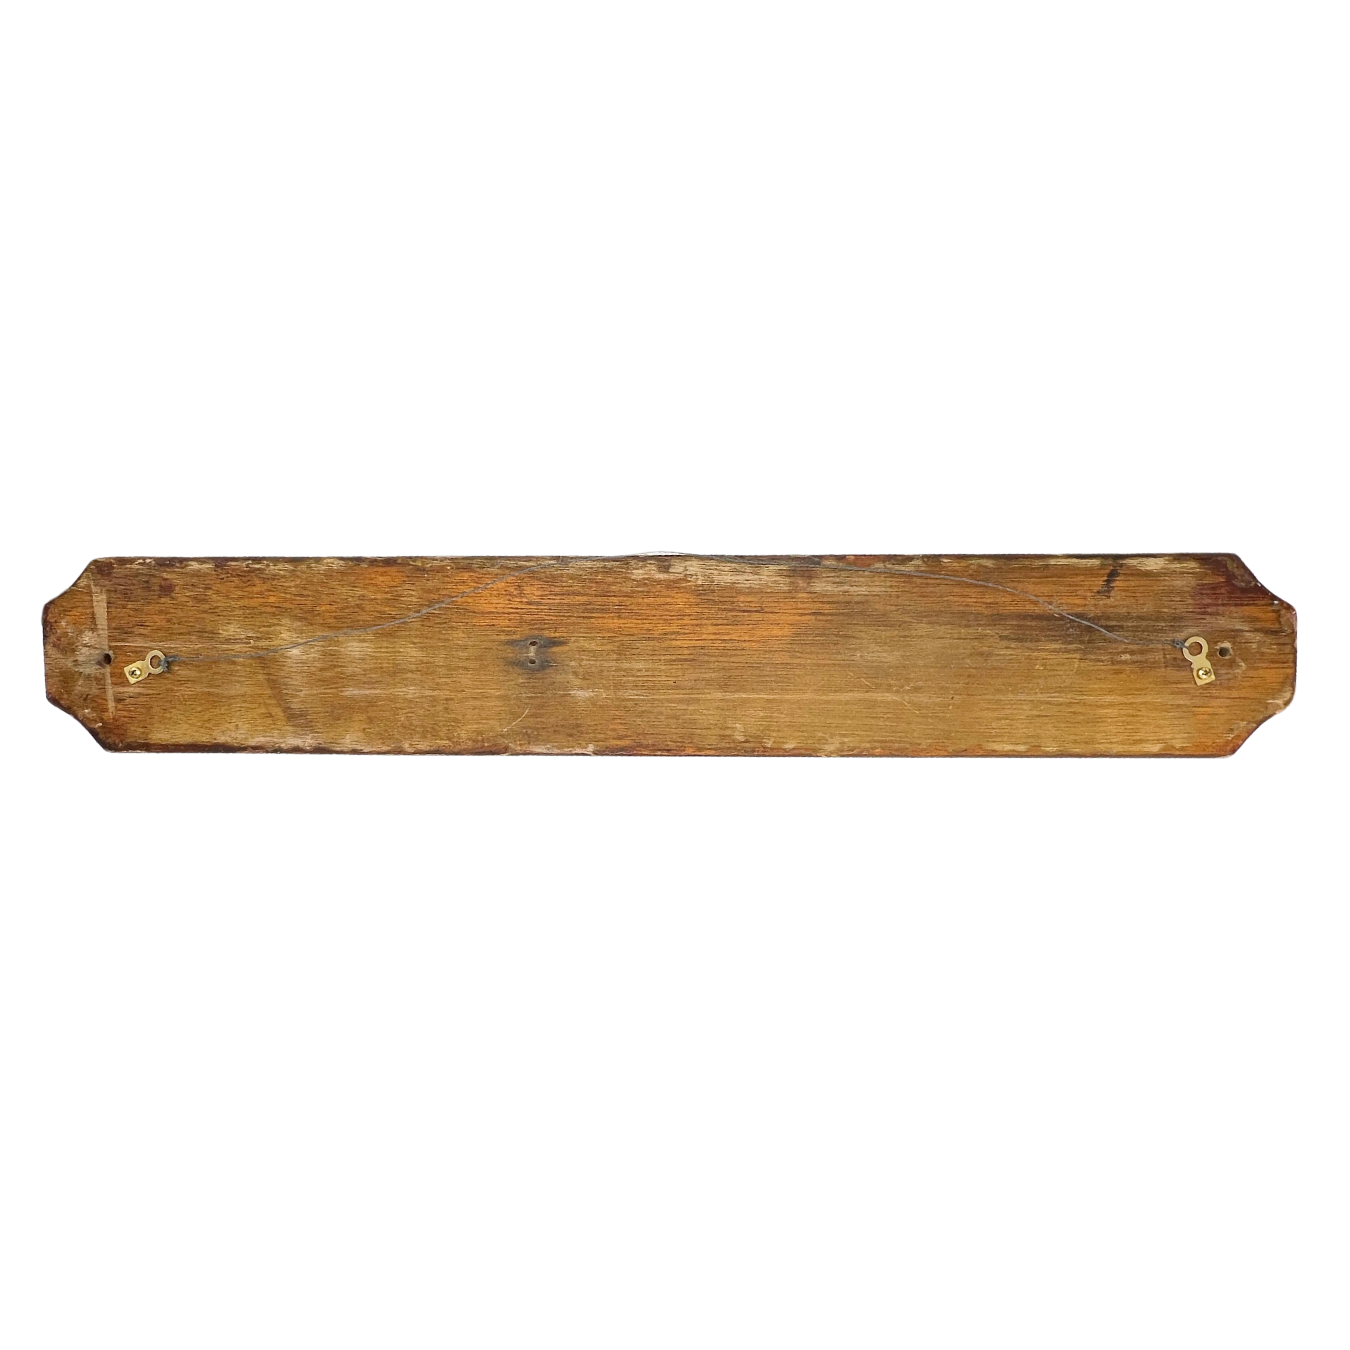 salvaged yacht quarterboard / boat name